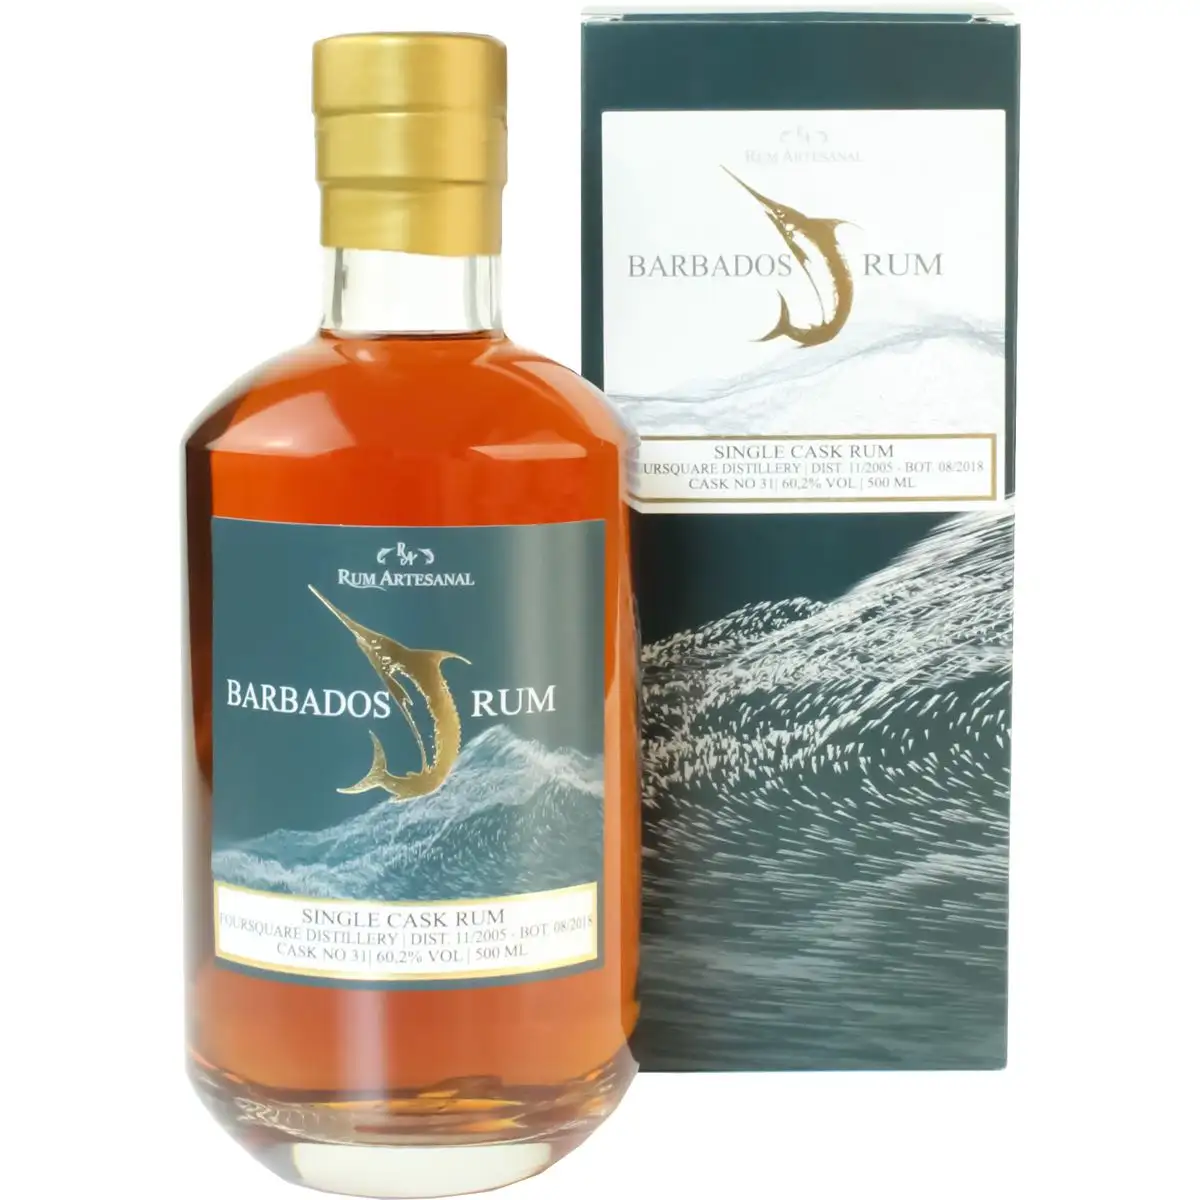 Image of the front of the bottle of the rum Rum Artesanal Barbados Rum MBFS